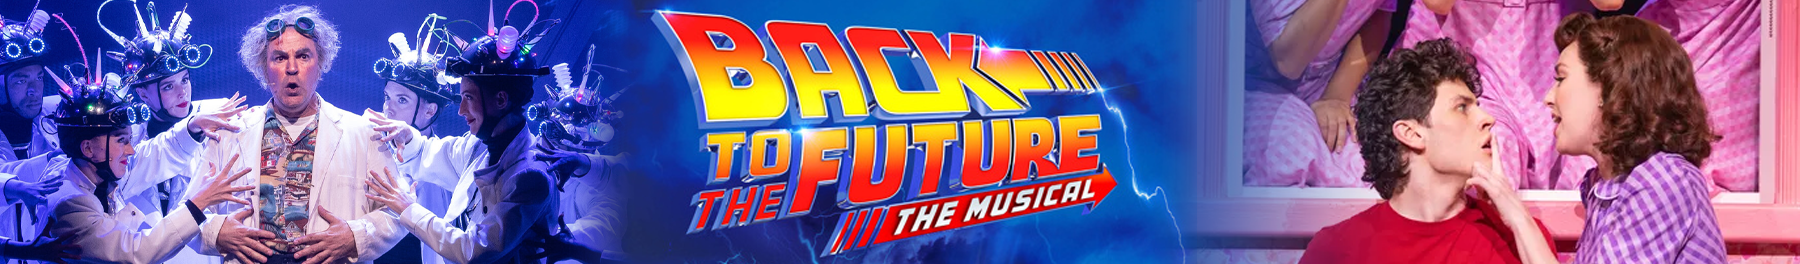 Back To The Future on Broadway